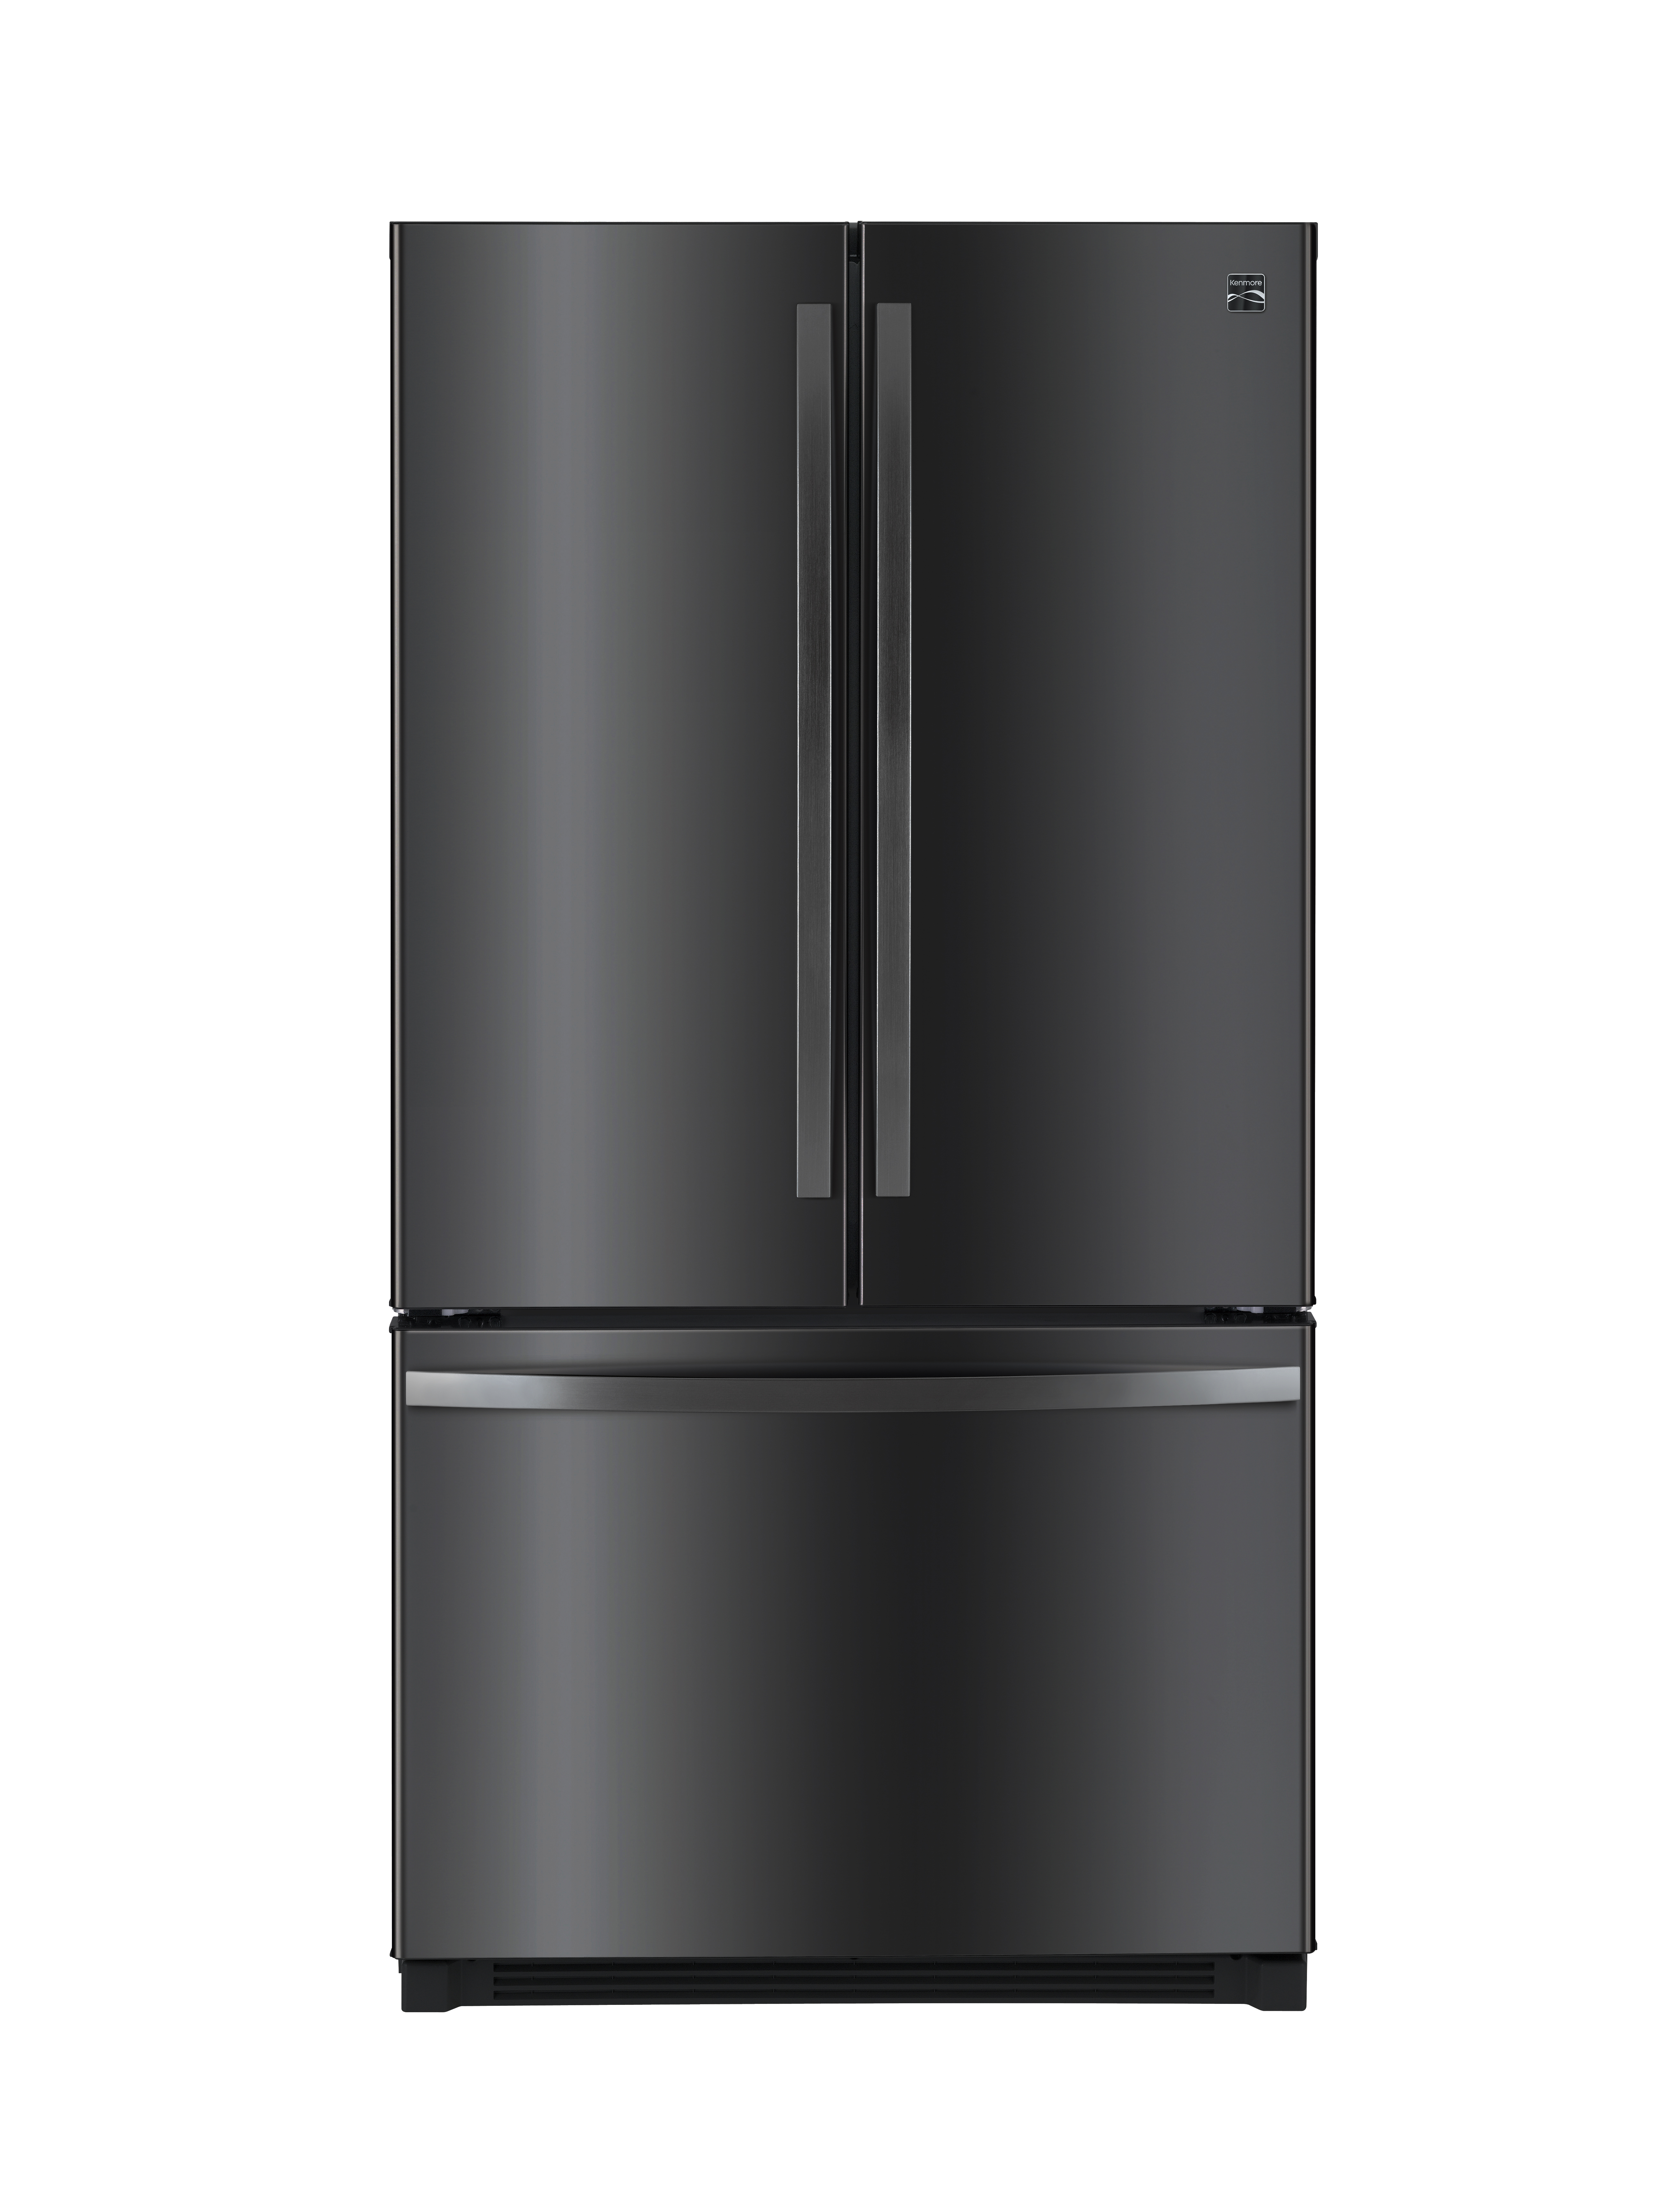 Kenmore 73027 26.1 cu. ft. French Door Refrigerator in Black Stainless Steel Finish